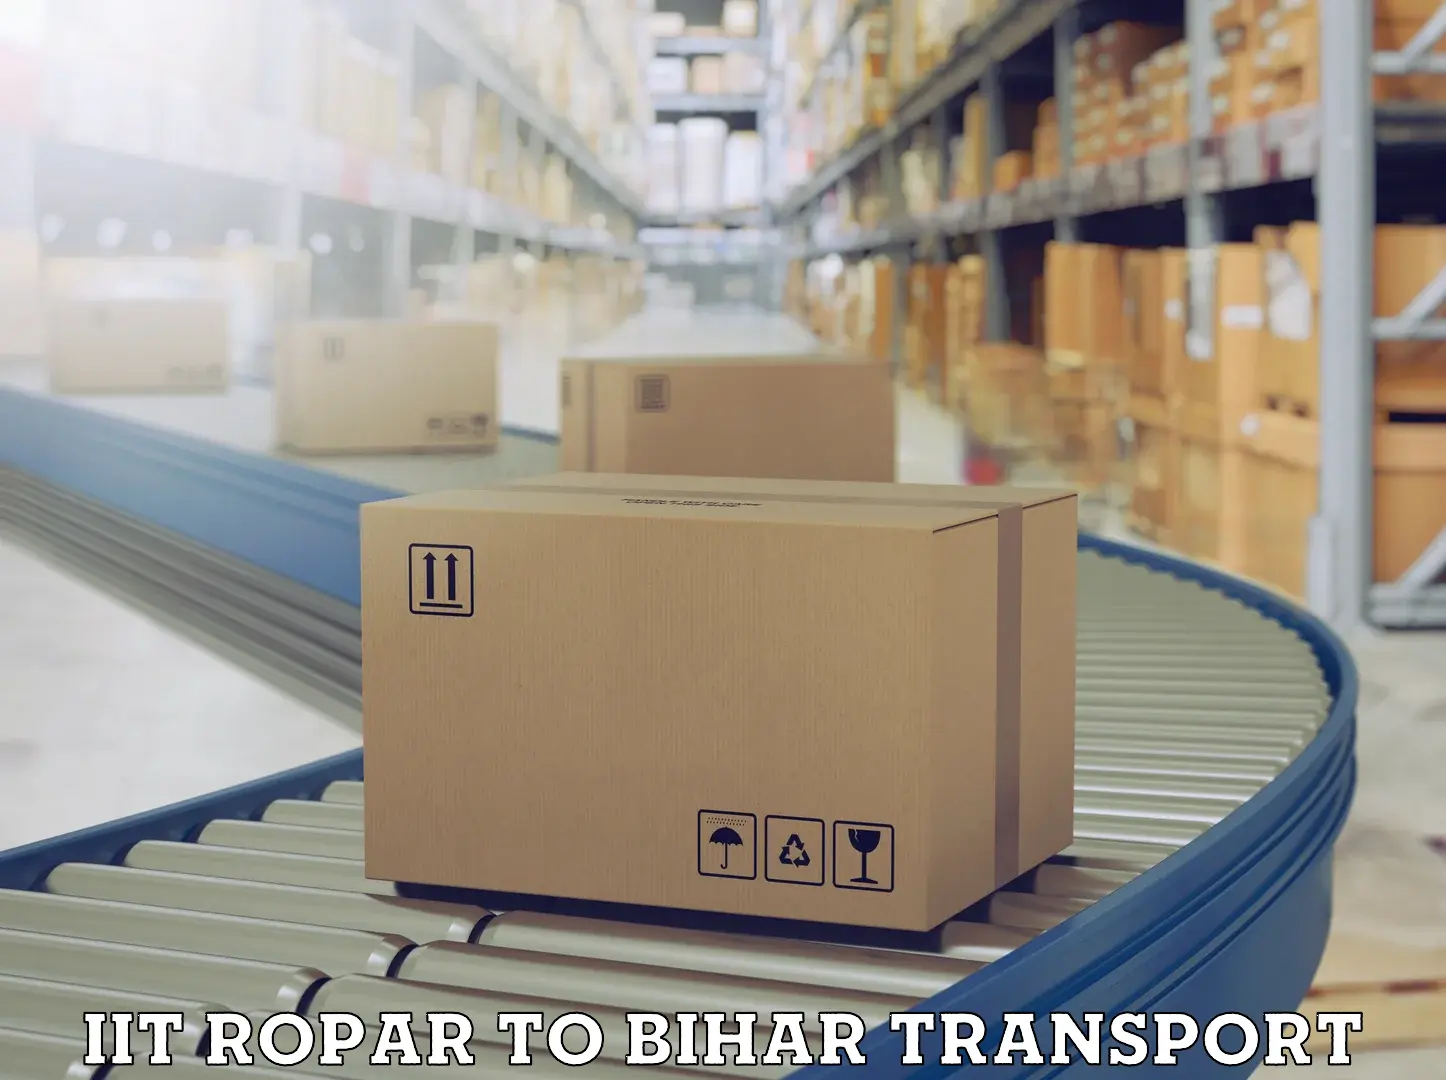 Air freight transport services IIT Ropar to Fatwah